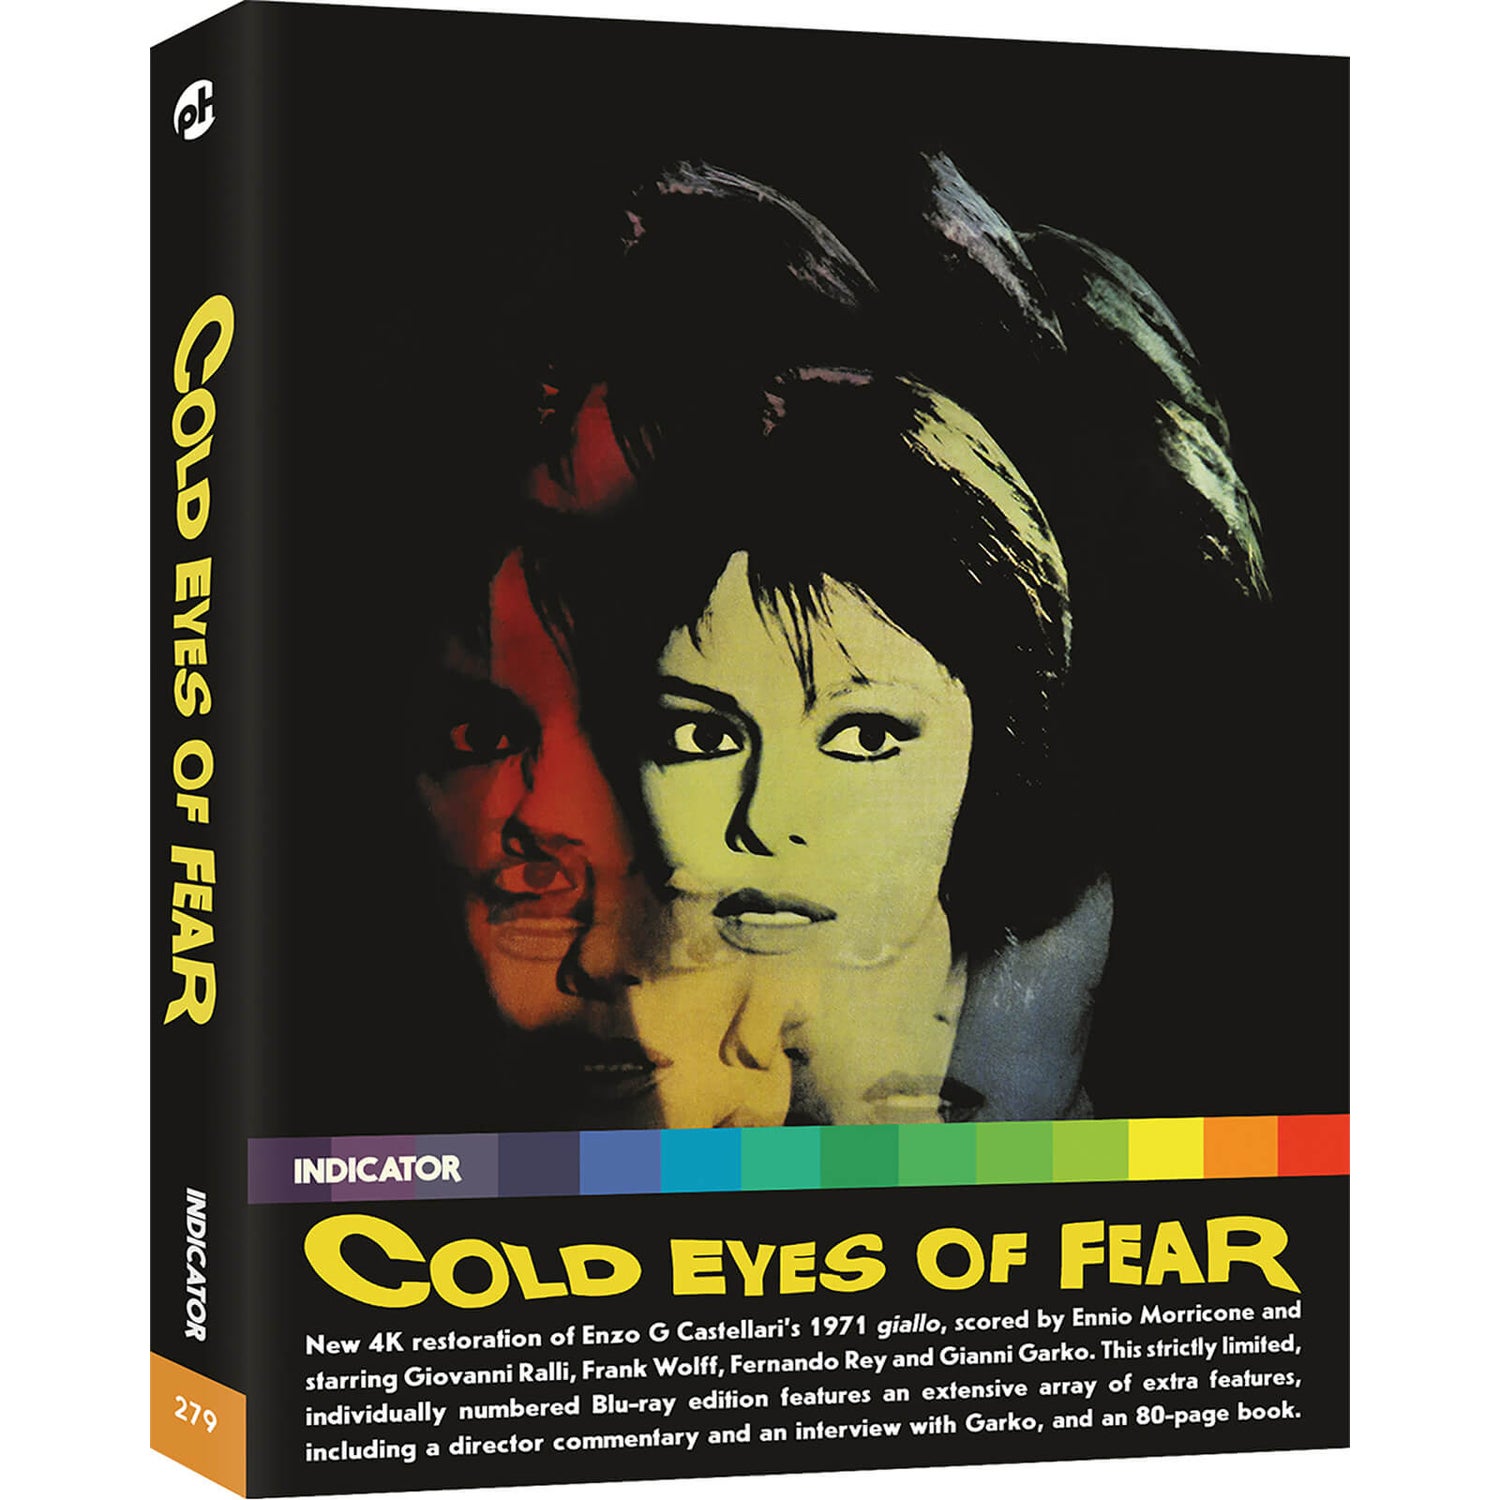 Cold Eyes of Fear - Limited Edition